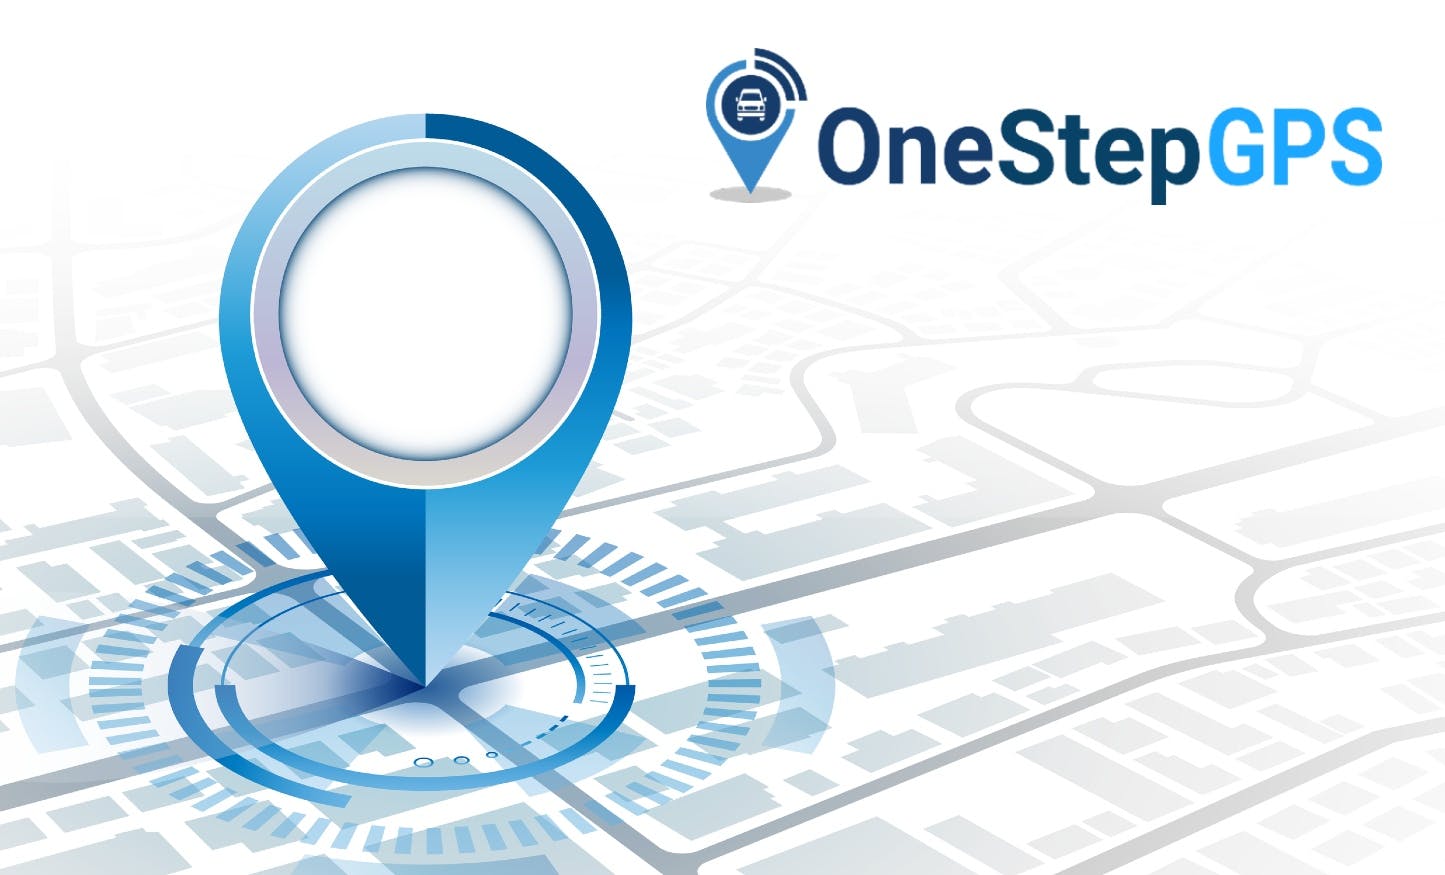 One Step GPS Review: Features, Pros & Cons, and Alternatives!